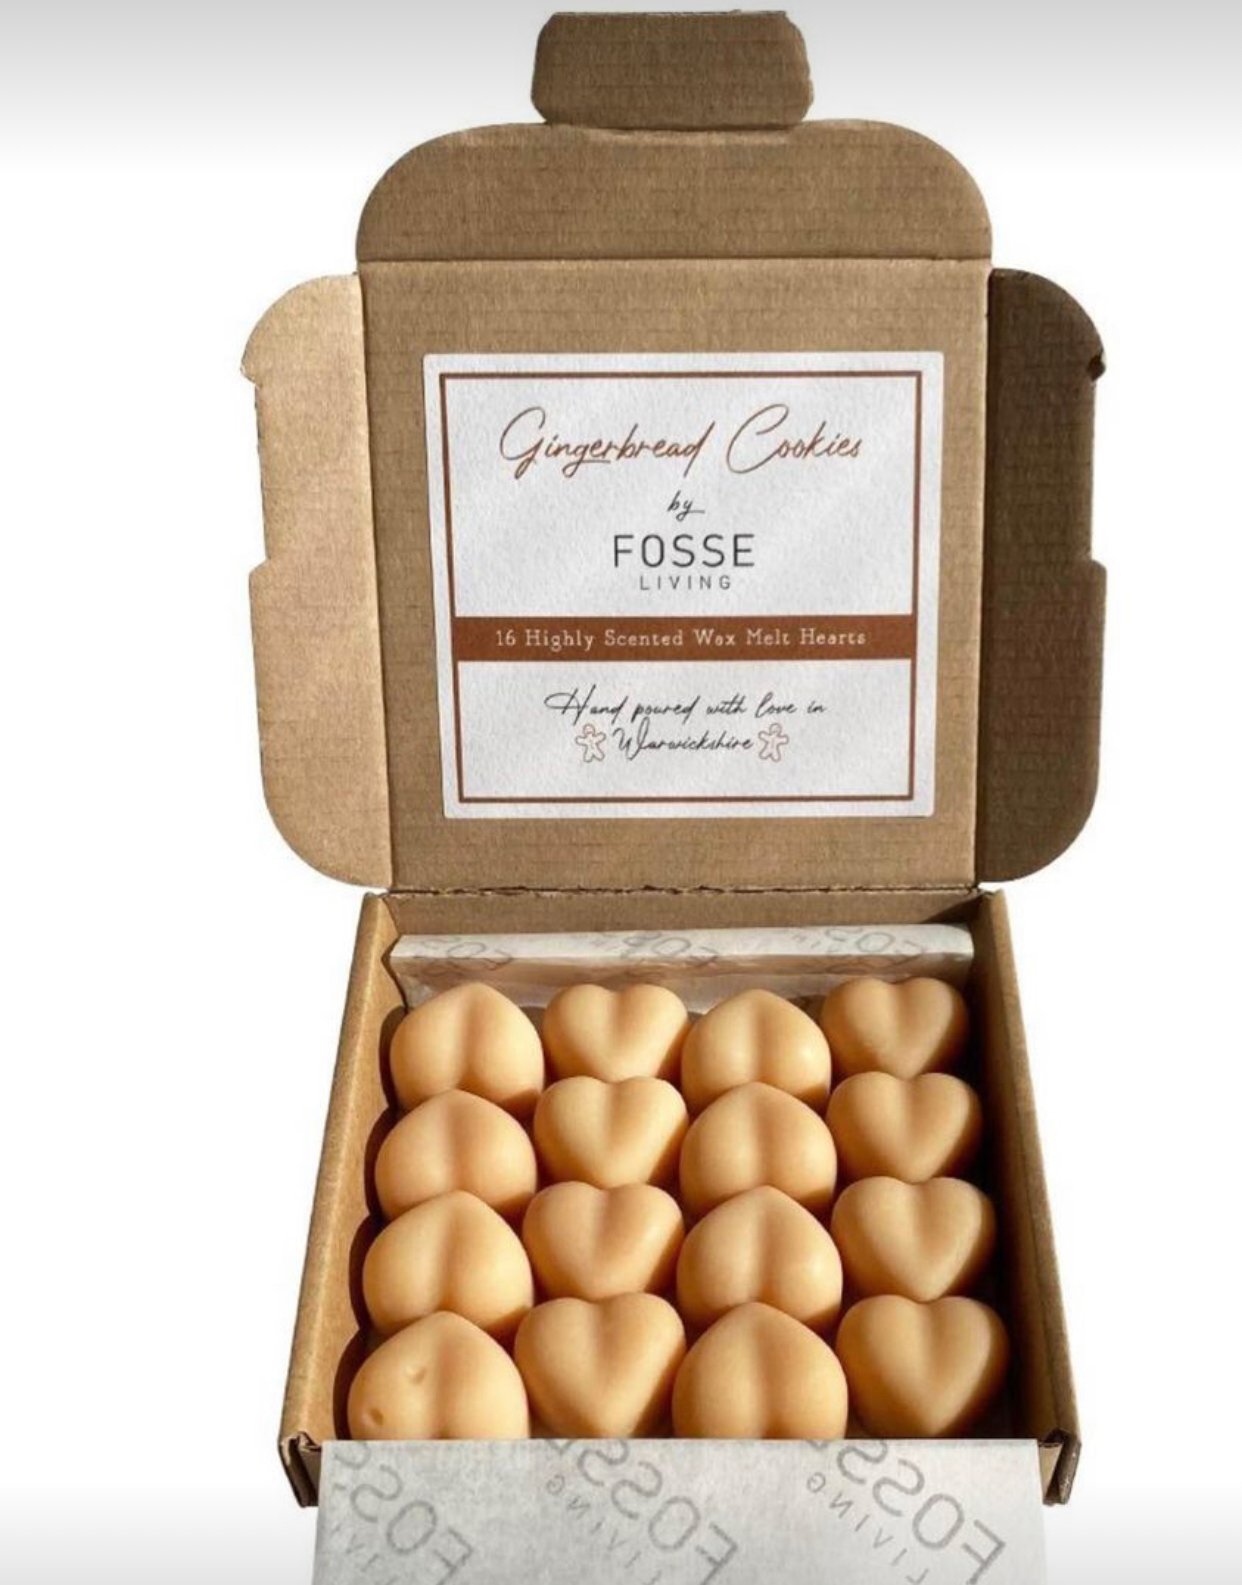 Gingerbread cookies scented wax melts